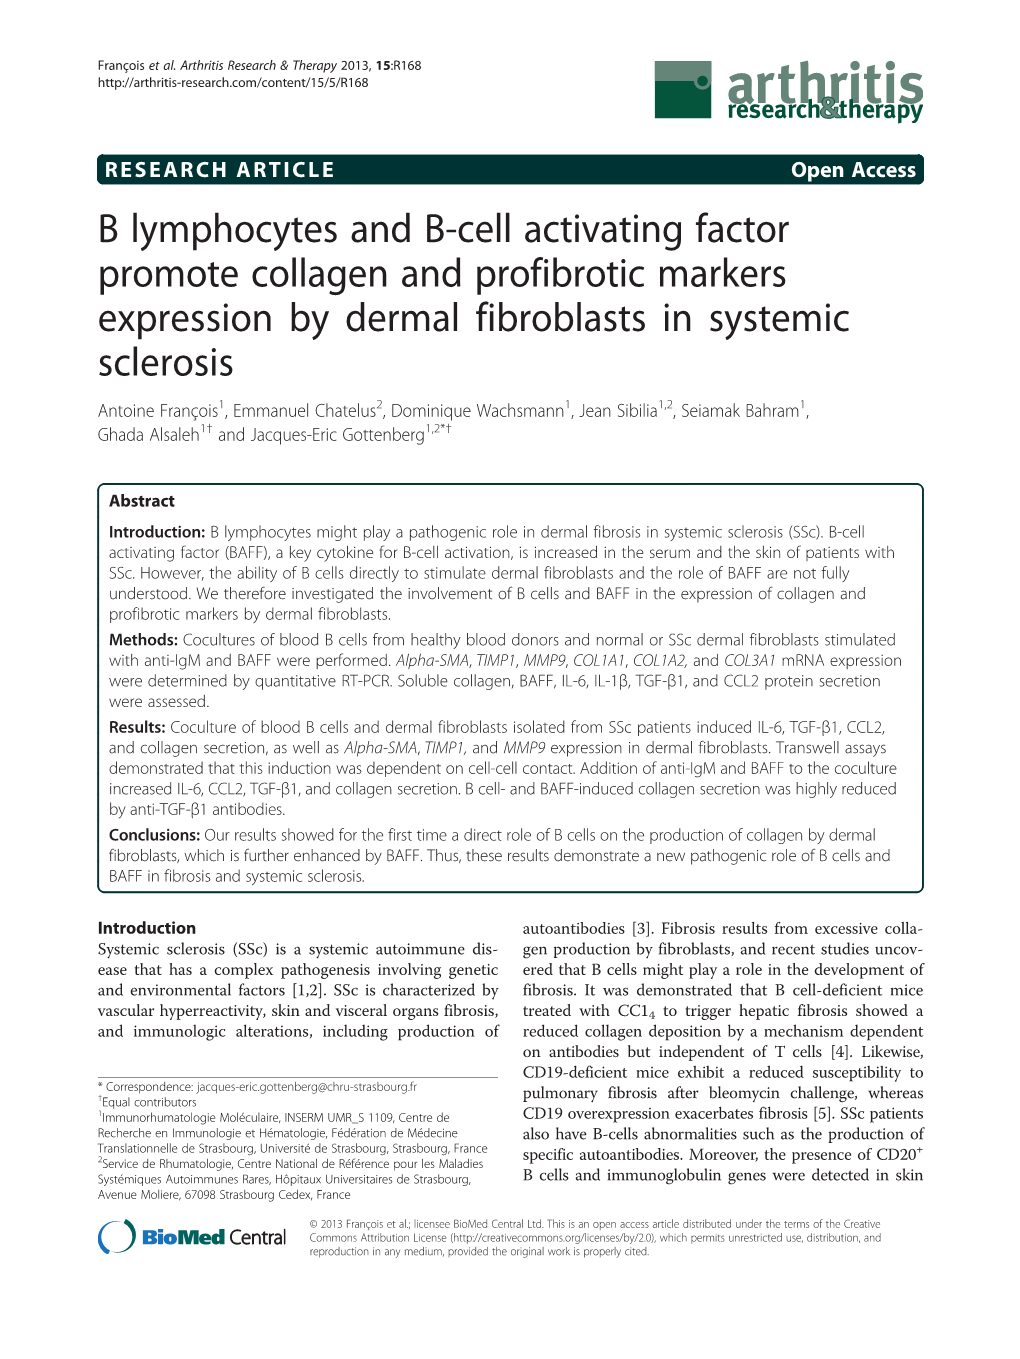 B Lymphocytes and B-Cell Activating Factor Promote